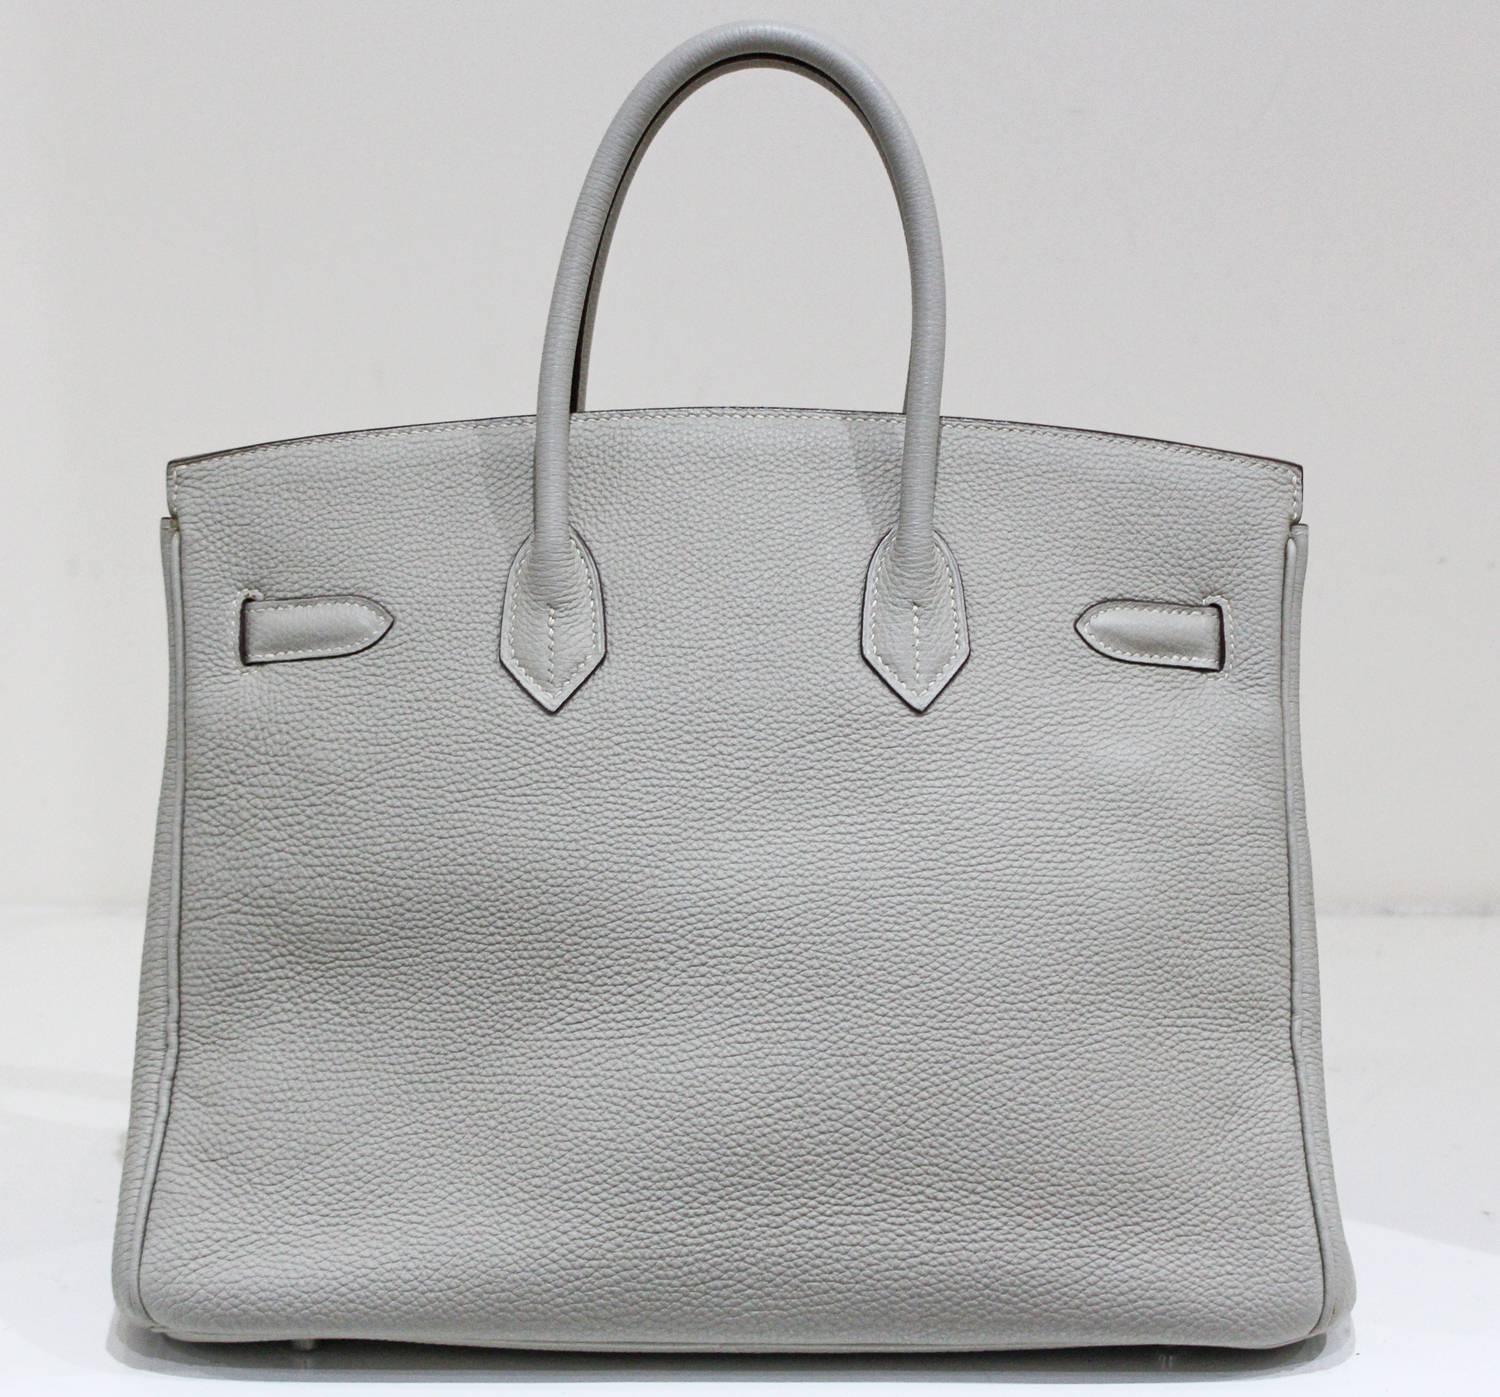 Hermes 35 cm Birkin Bag in Clemence Leather In Excellent Condition In London, GB